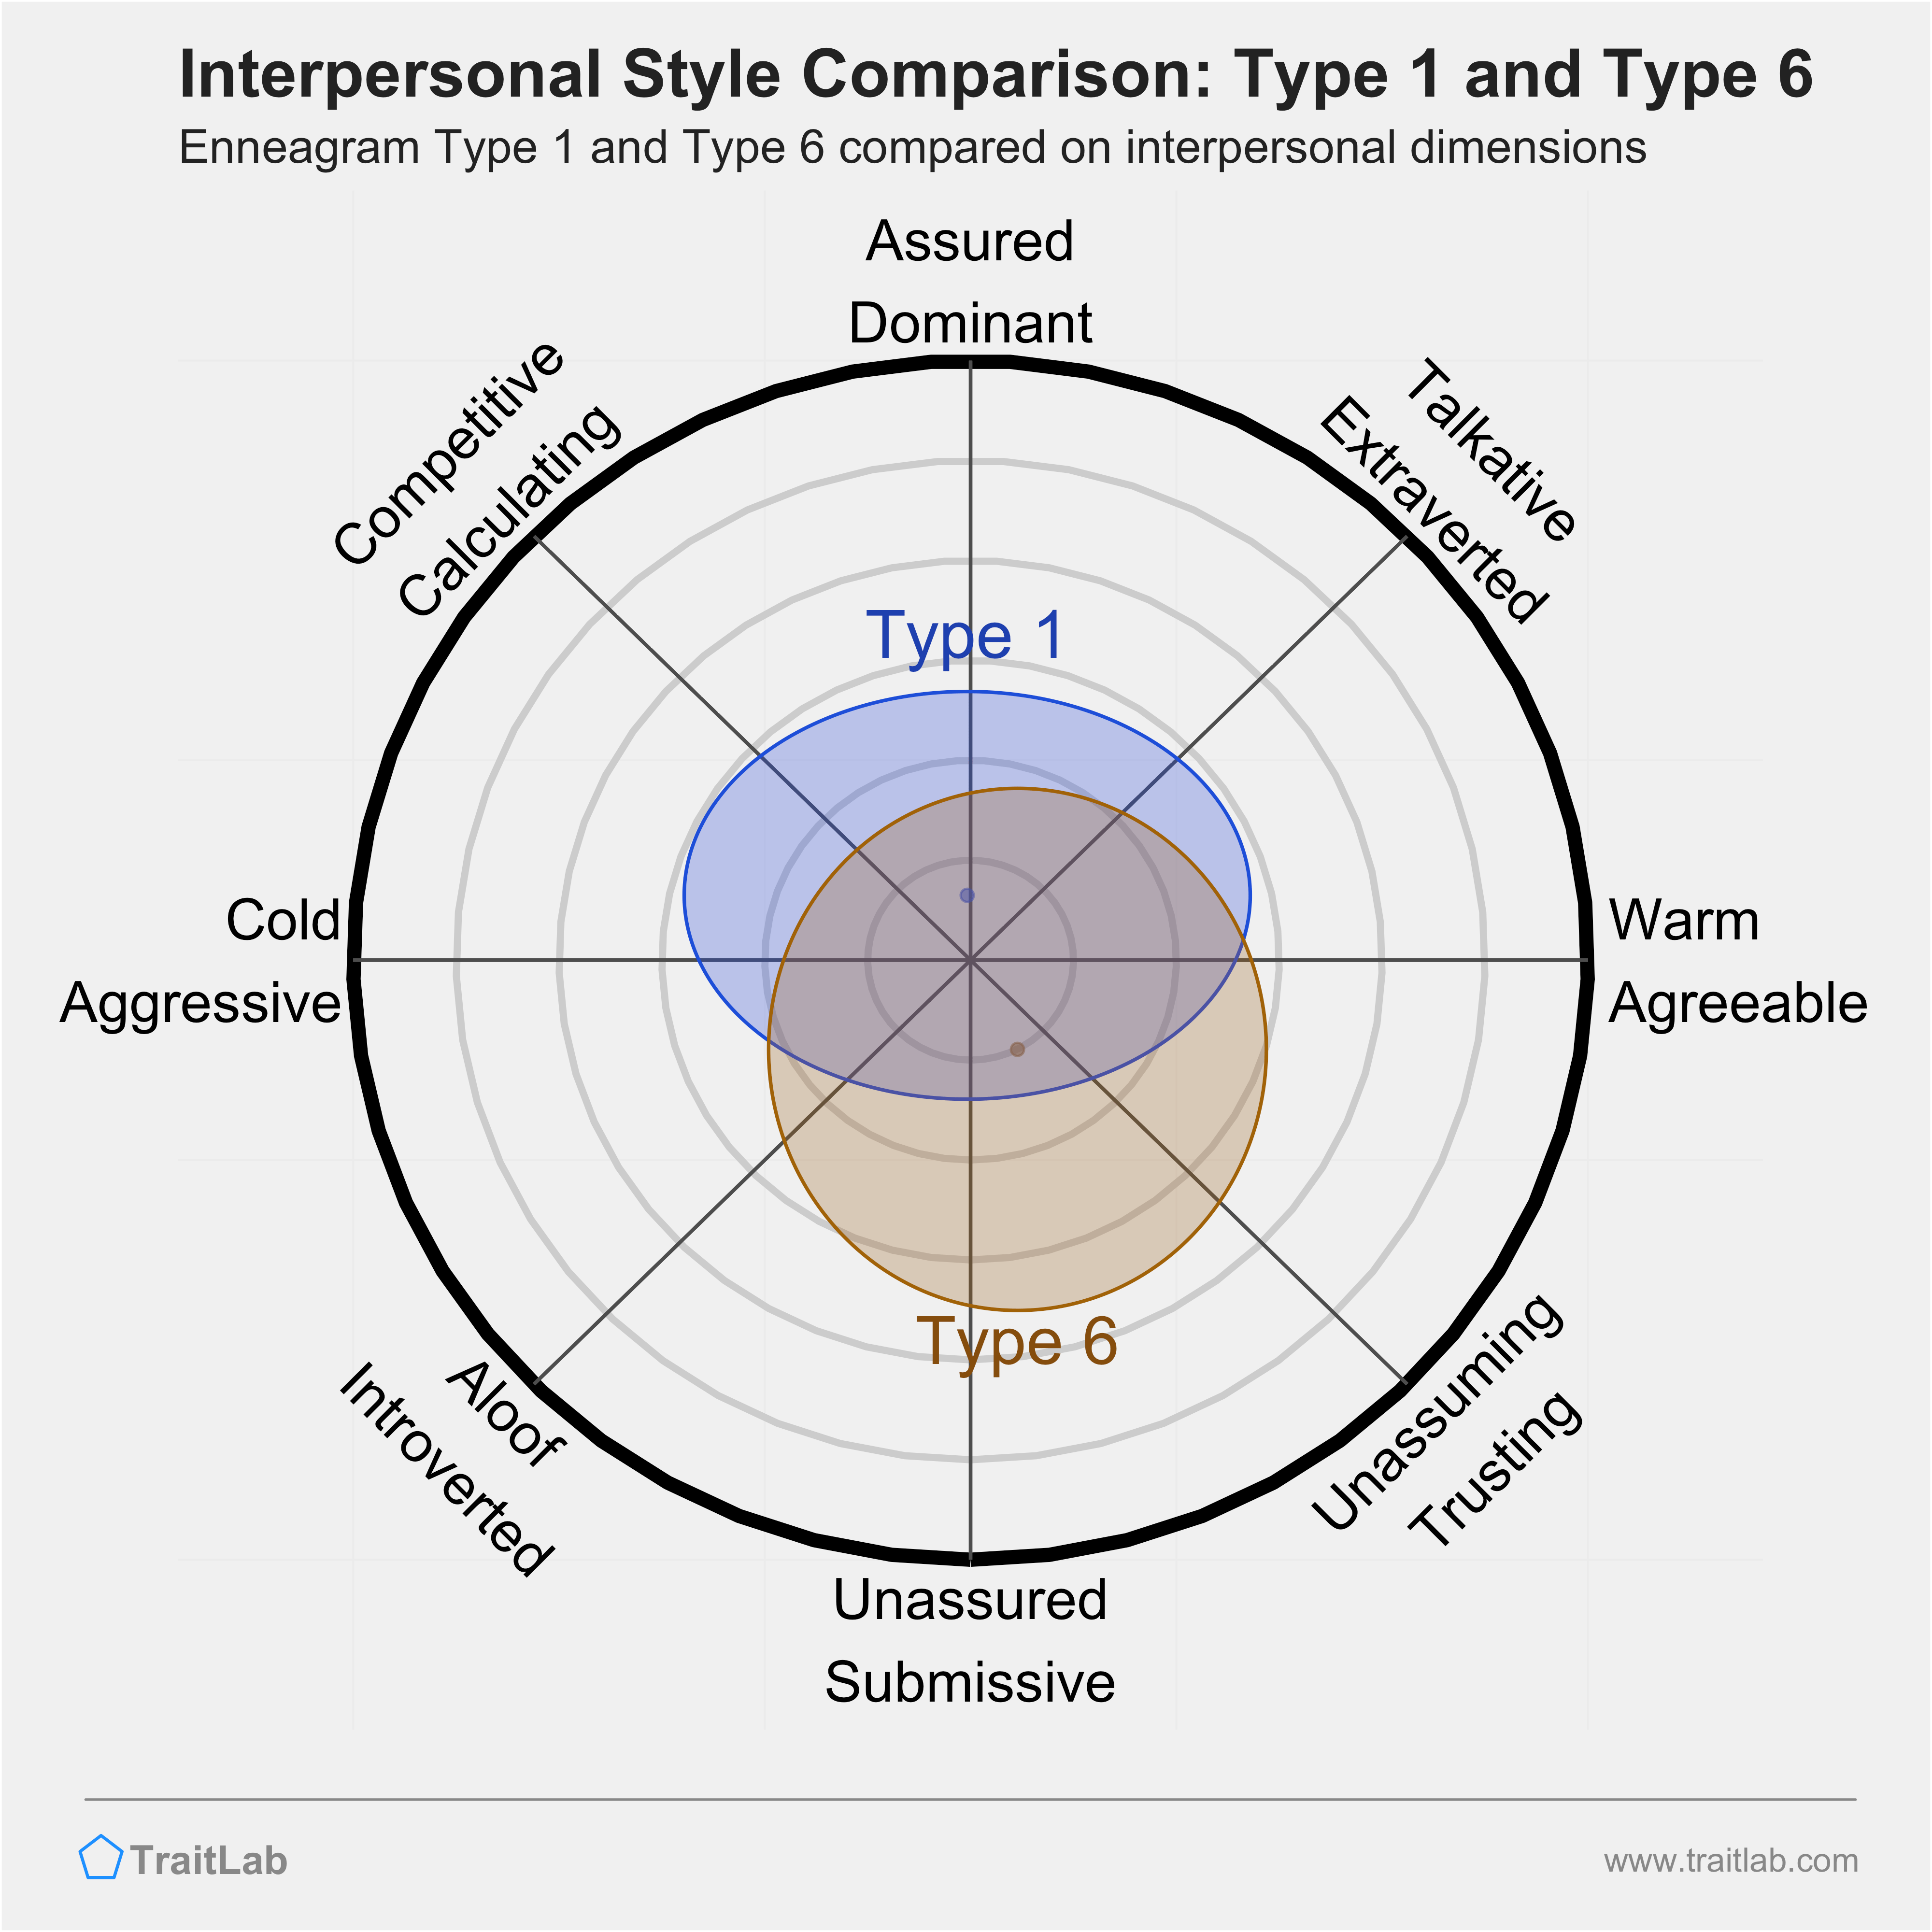 Enneagram Type 1 and Type 6 comparison across interpersonal dimensions